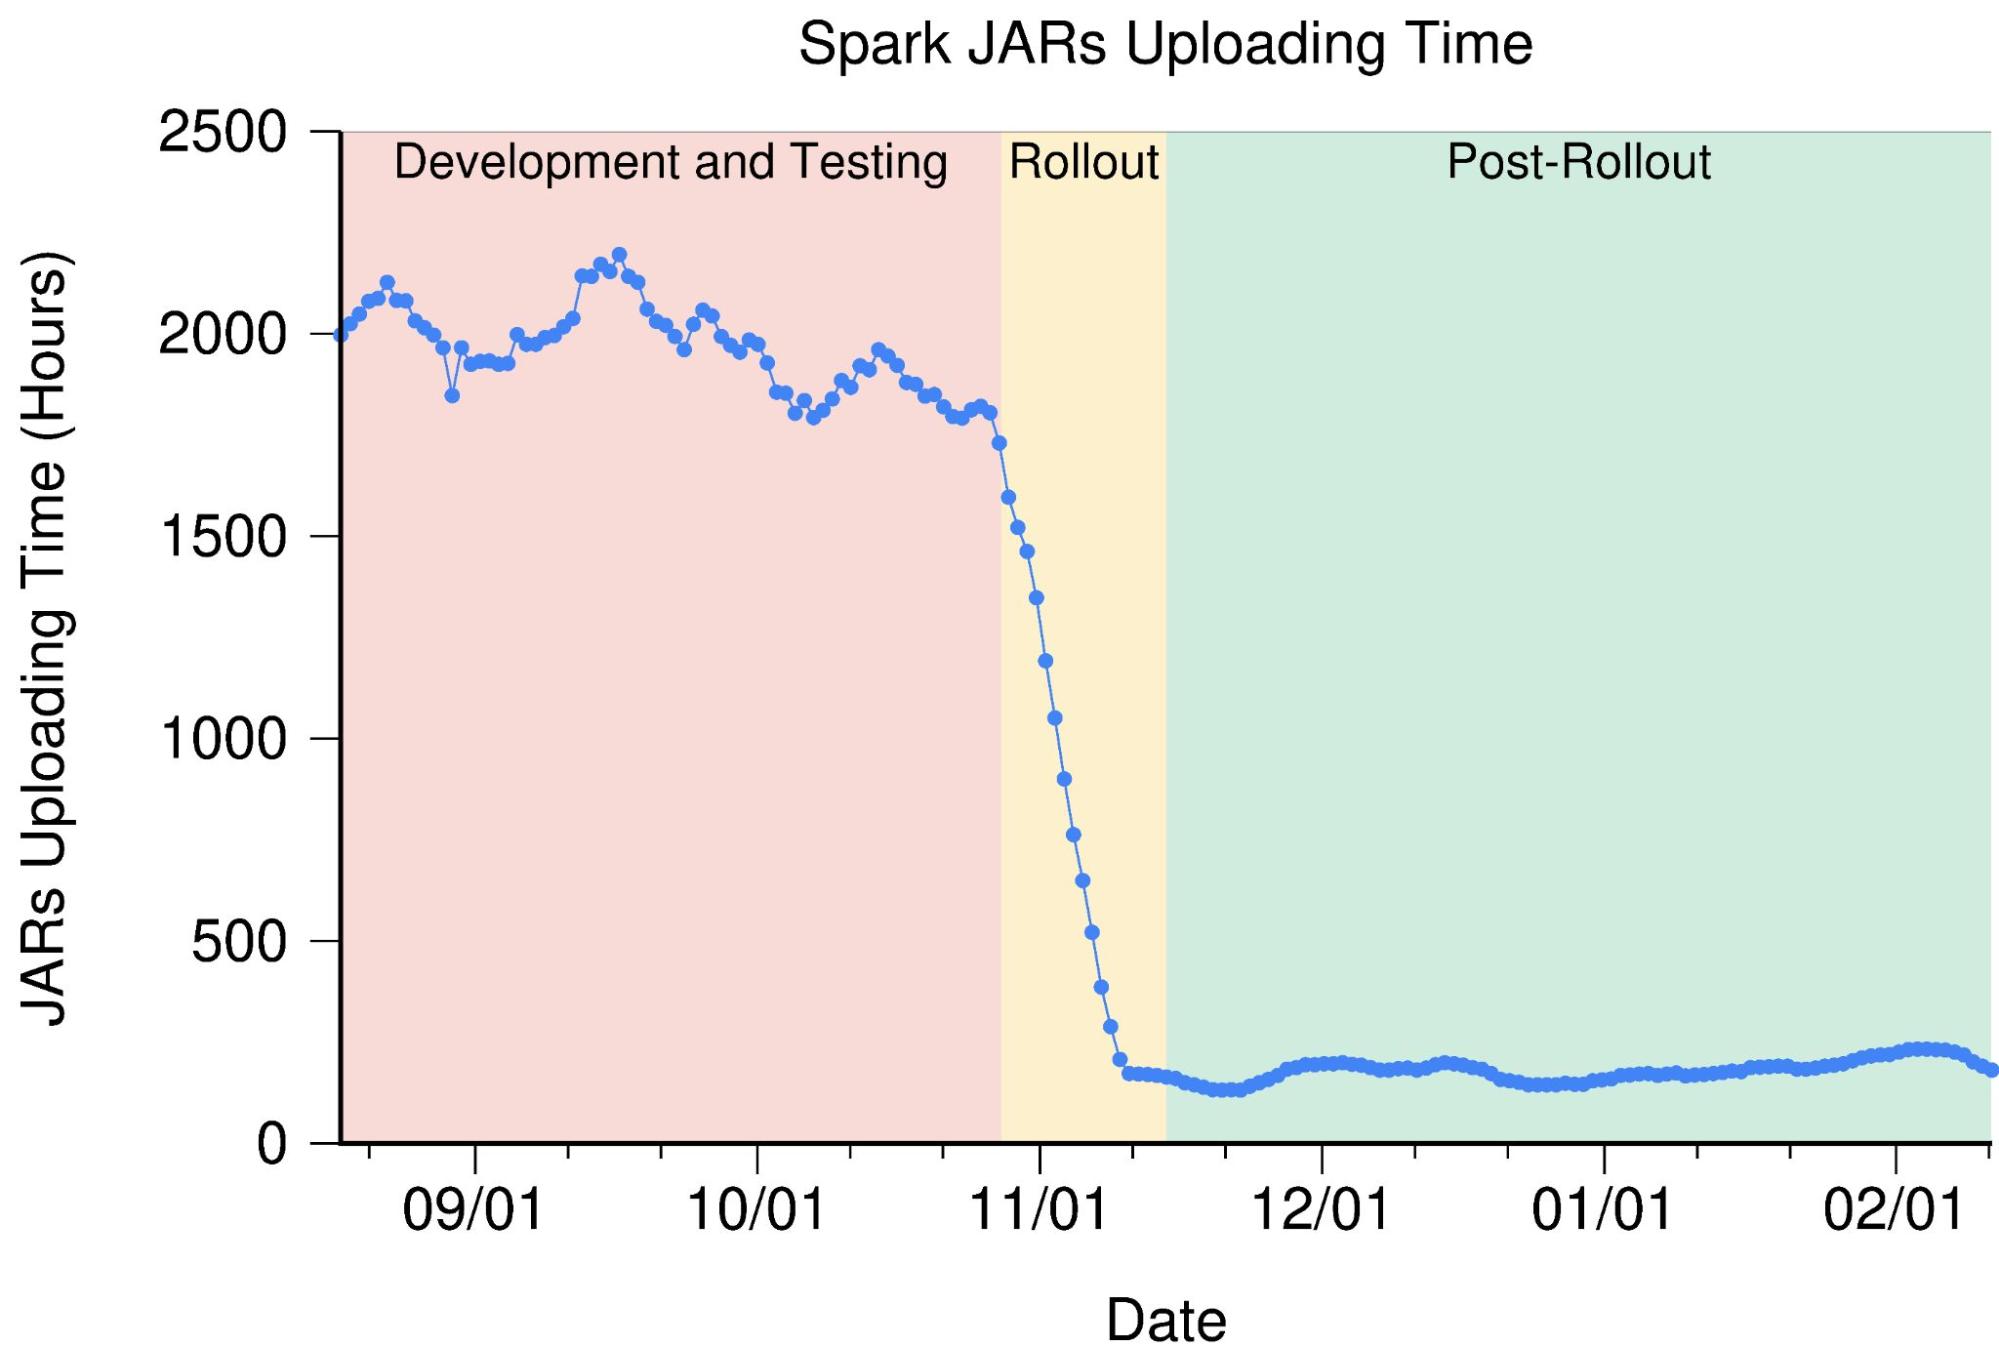 Graphic that shows the Spark JAR uploading time over six months